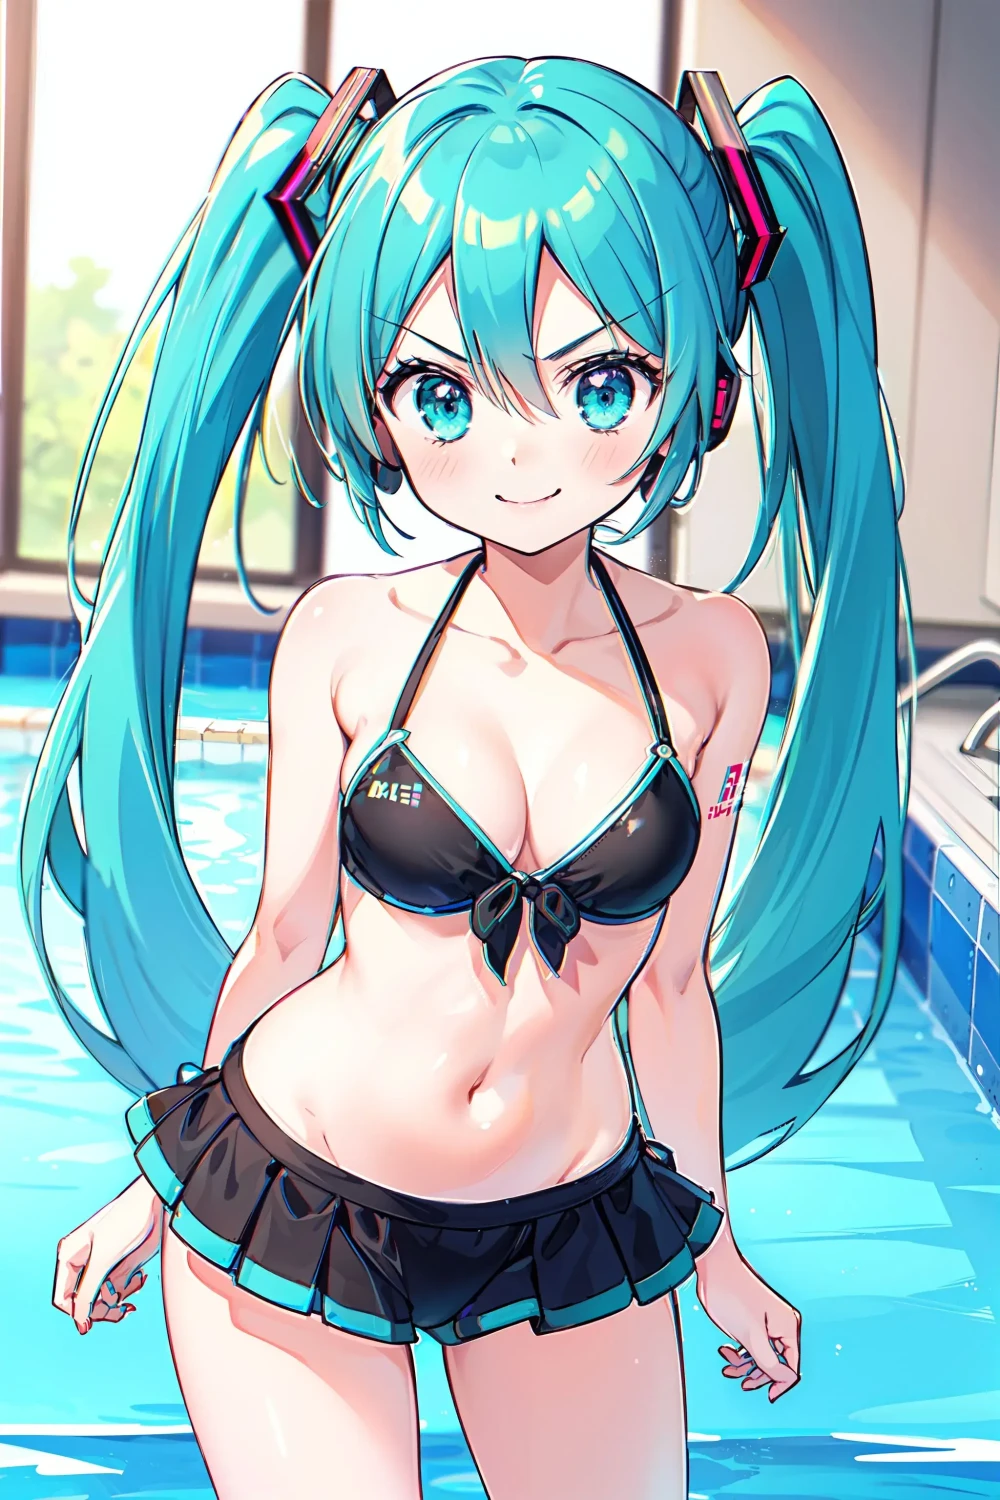 hatsune-miku-anime-style-all-ages-32